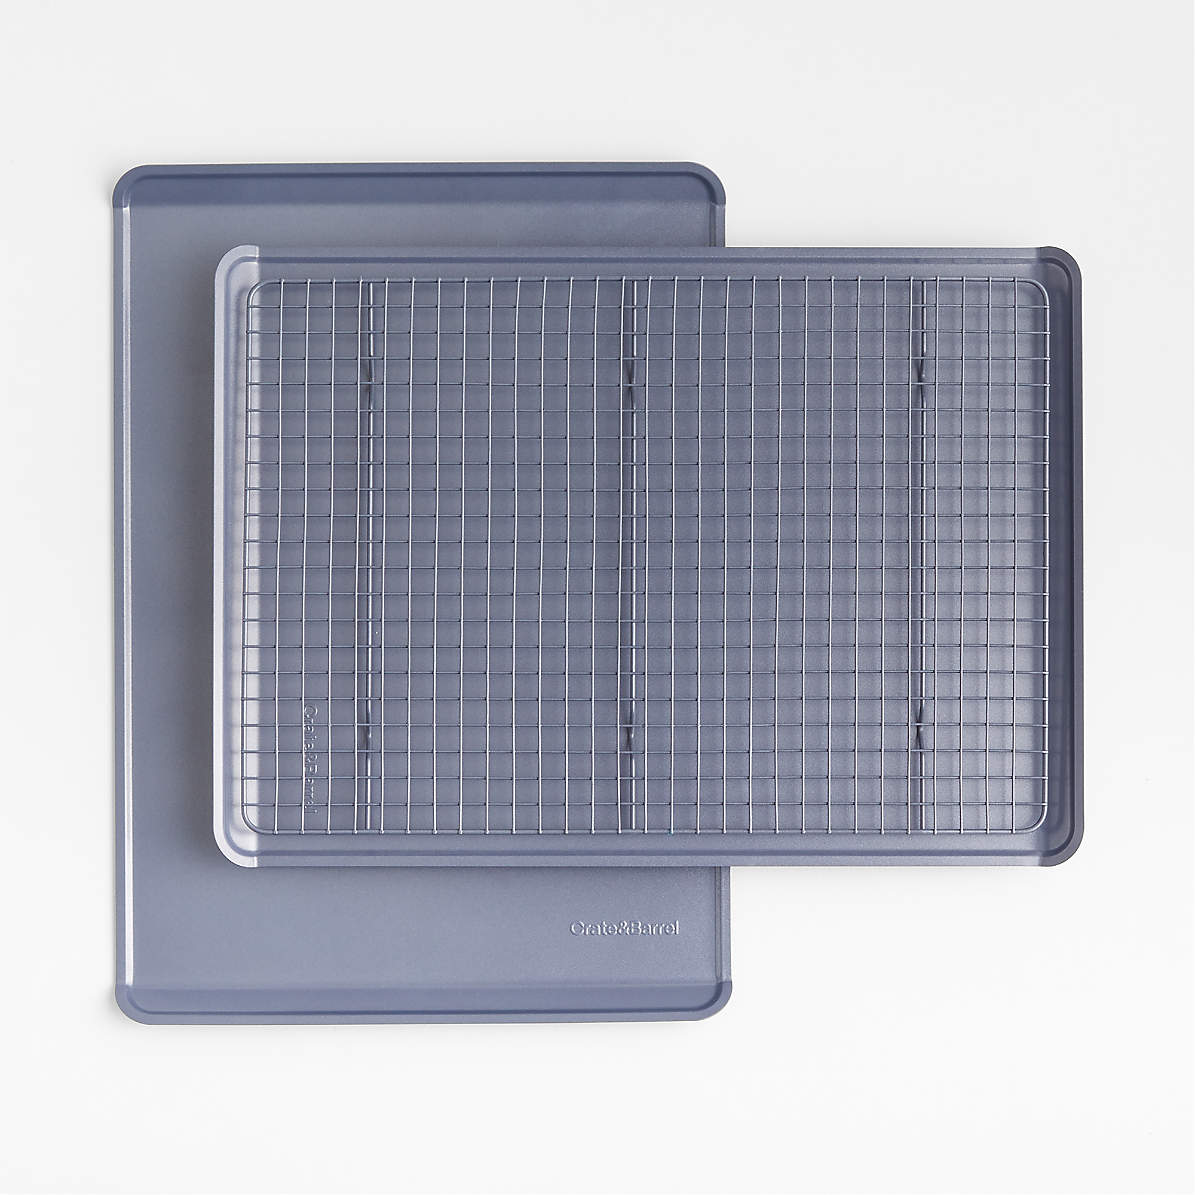 Crate & Barrel Slate Blue 3-Piece Non-Stick Cookie Sheet and Cooling Rack Set